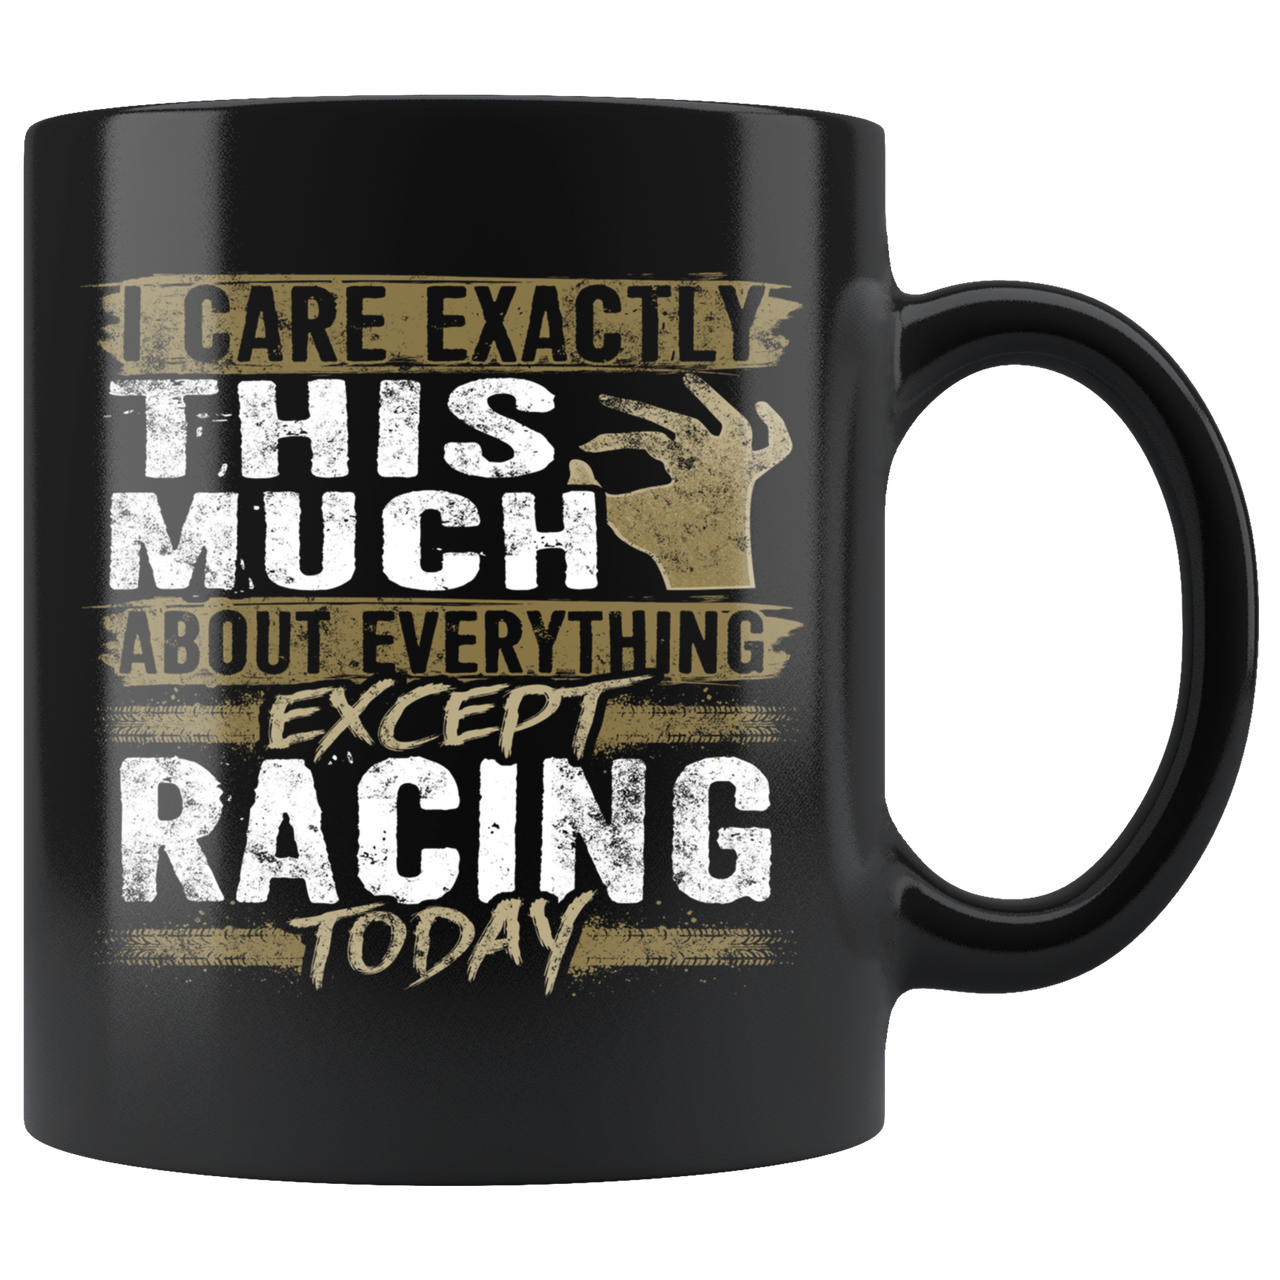 I Care Exactly This Much About Everything Except Racing Today Mug!